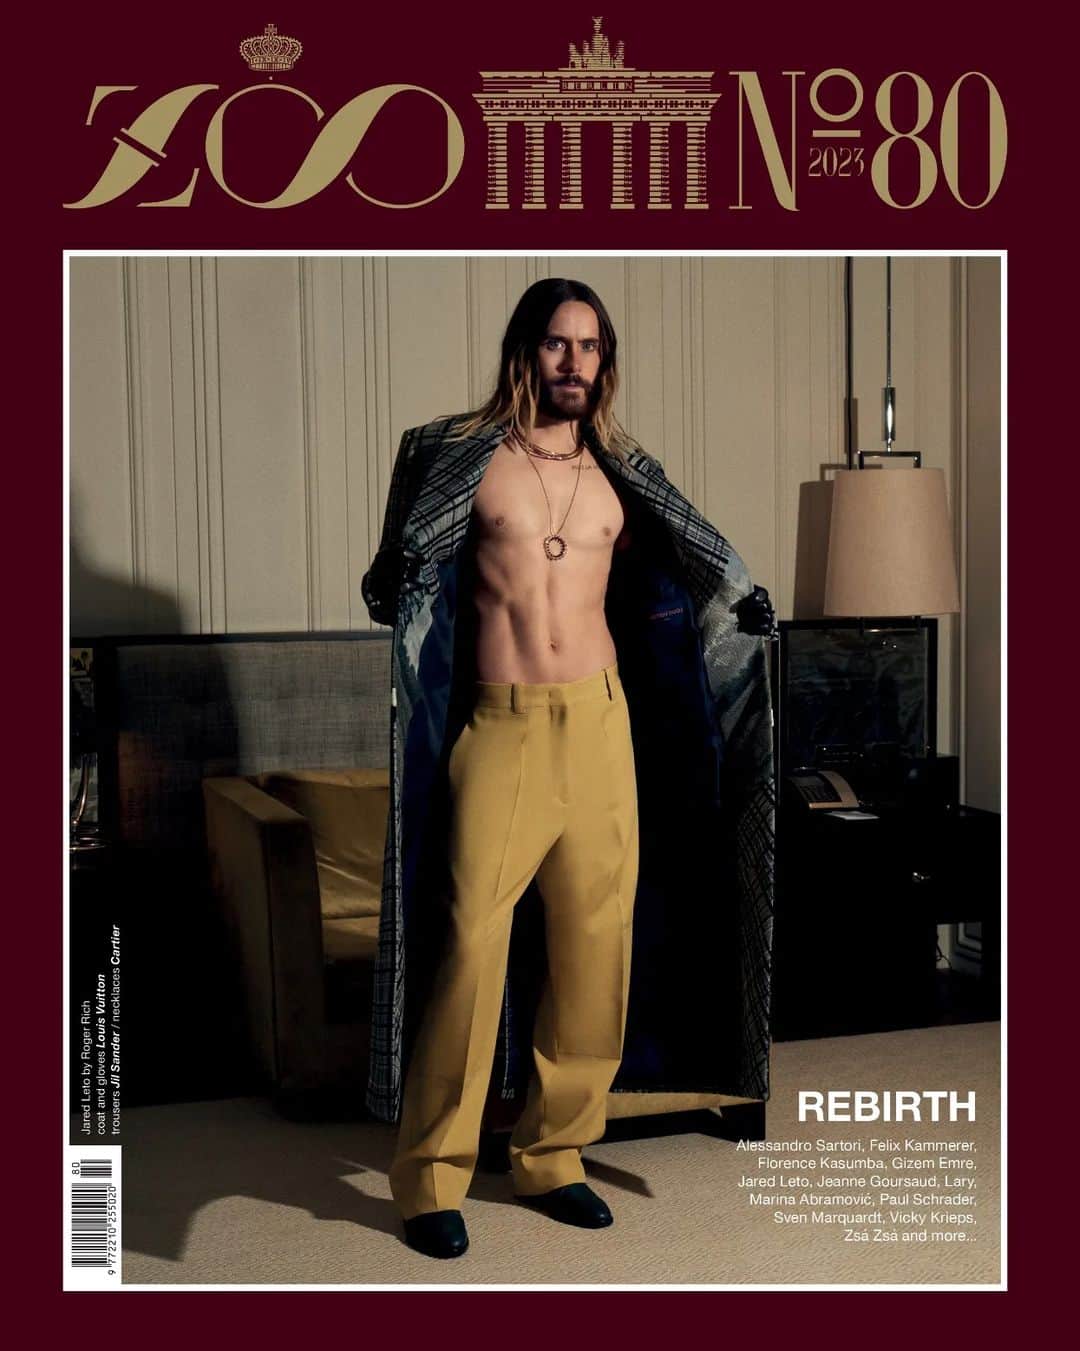 ZOO Magazineさんのインスタグラム写真 - (ZOO MagazineInstagram)「ZOO MAGAZINE ANNIVERSARY ISSUE #80: REBIRTH  Polyartist Jared Leto is releasing his newest album with Thirty Seconds to Mars.  The first single, "Stuck" is just the first of many songs in the band's new album "It’s the End of the World But It’s A Beautiful Day". The band's new project has direct references to Leto's inspirations, and is the organic continuation of the journey that started with "Up in the Air", celebrating art and design. Thirty Seconds to Mars's new album pushes boundaries and showcases the passion that fuels the project.  "We worked on songs for quite a long time, which gave us an opportunity to make an album that had a lot of variety, a lot of different types of songs. To explore new territory and new technologies, new ways of writing and recording."  ZOO MAGAZINE celebrates its 20th anniversary with Anniversary Issue 80 coming out on the last week of September.  Jared Leto by Roger Rich  Shot and interviewed exclusively for ZOO Magazine – 20 YEARS  Jared wears:  coat and gloves Louis Vuitton @louisvuitton trousers Jil Sander @jilsander shoes Roker @rokeratelier jewelry Cartier @cartier  Photographer: Roger Rich @roger_rich_photographer  Talent: Jared Leto @jaredleto Stylist: Michael Miller @ Stella Creative @millermode  Hair: Petra Sellge @ The Wall Group @petransellge Using R+CO BLEU @randcobleu Make Up: Alexis Day @alexisdayhmu using BOY DE CHANEL AND LE PINCEAU DE CHANEL @chanelofficial @chanel.beauty  Photographer's Assistant: Matt Foxley Stylist’s Assistant: Lacie Gittins Location: Rosewood London @rosewoodlondon  Interview: Manuela Martorelli @manuelamartorelli  Special thanks to Adam Guest   #ZOO80 #ZOOMagazine #SandorLubbe #fashionphotography #JaredLeto #RogerRich #ribirth #20YEARSZOOMAGAZINE #Berlin #30secondstomars」9月16日 0時51分 - zoomagazine